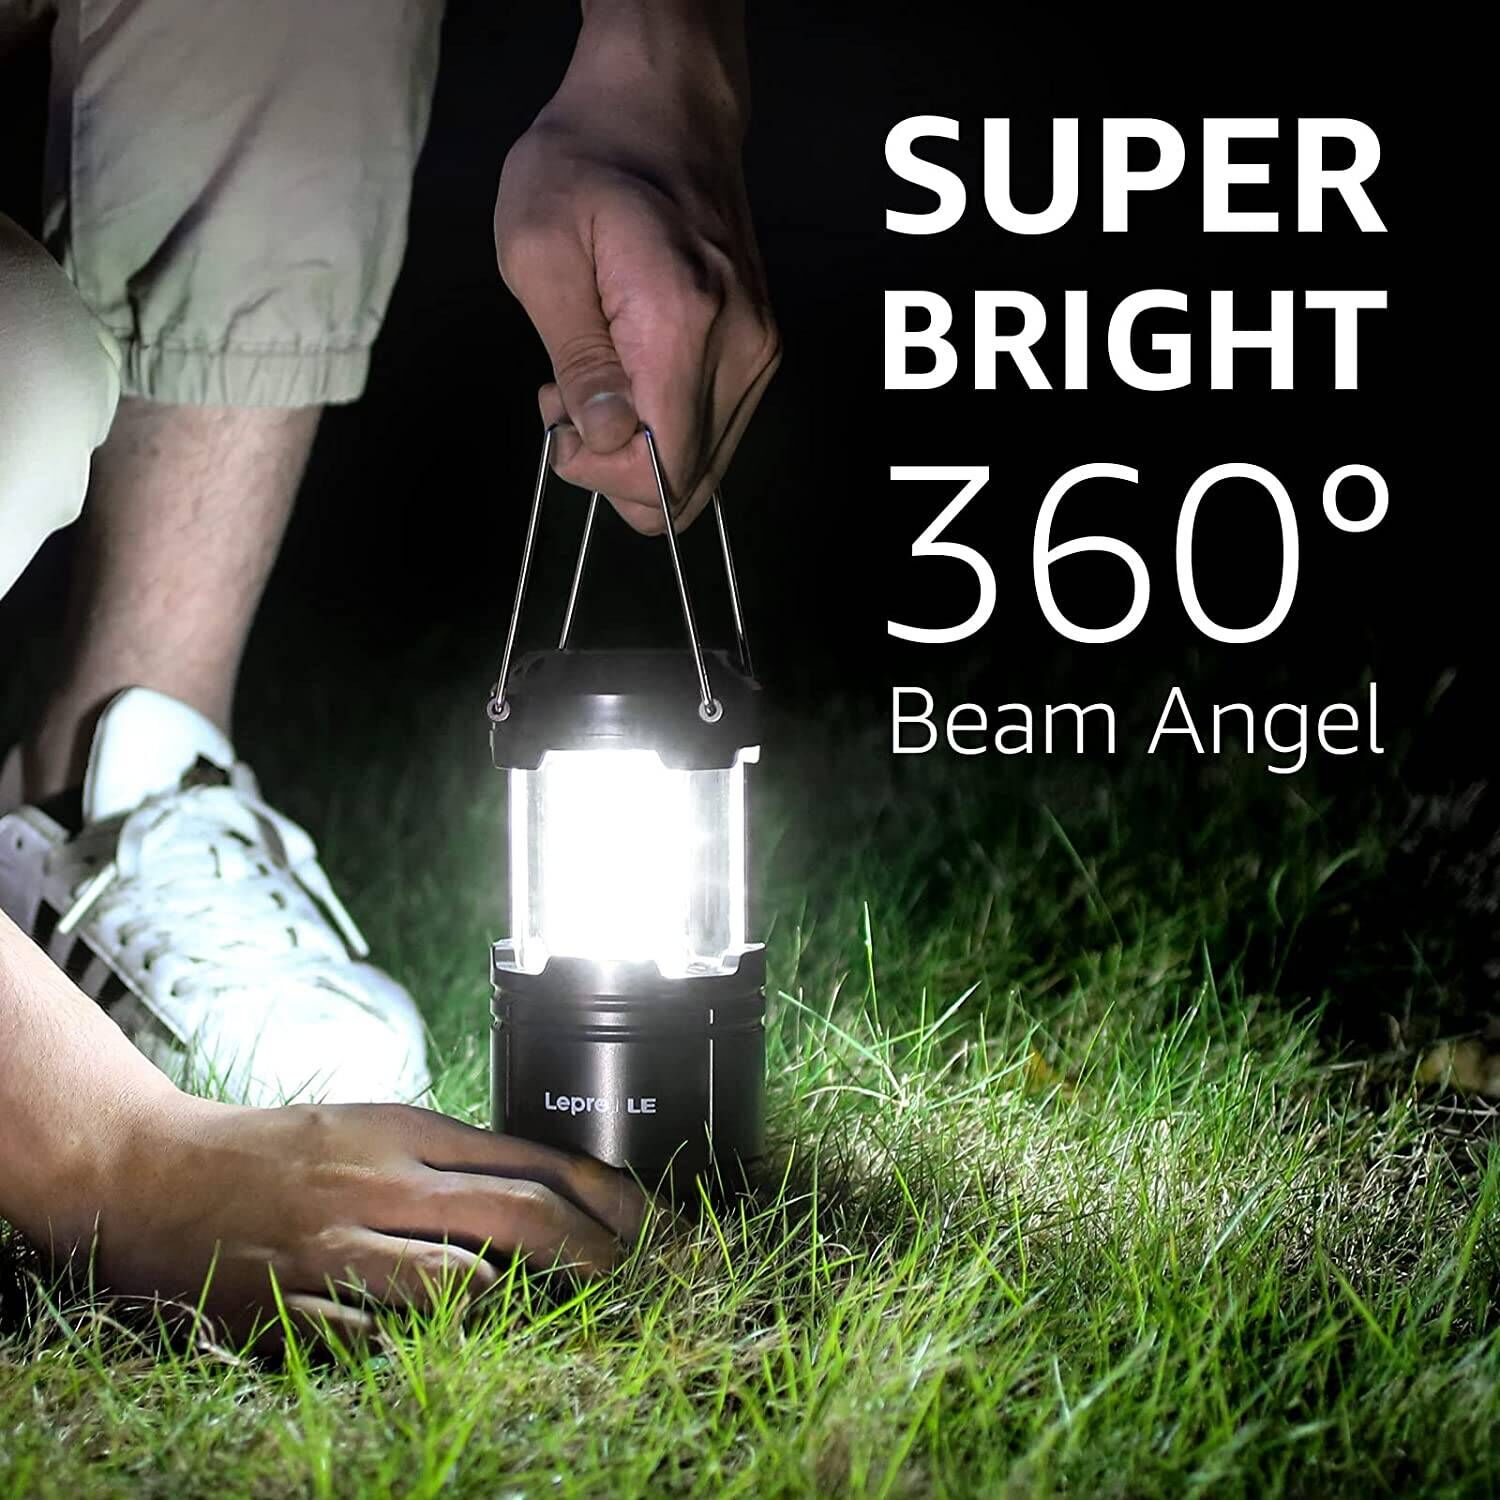 Vont 4-Pack LED Camping Lantern is on sale at